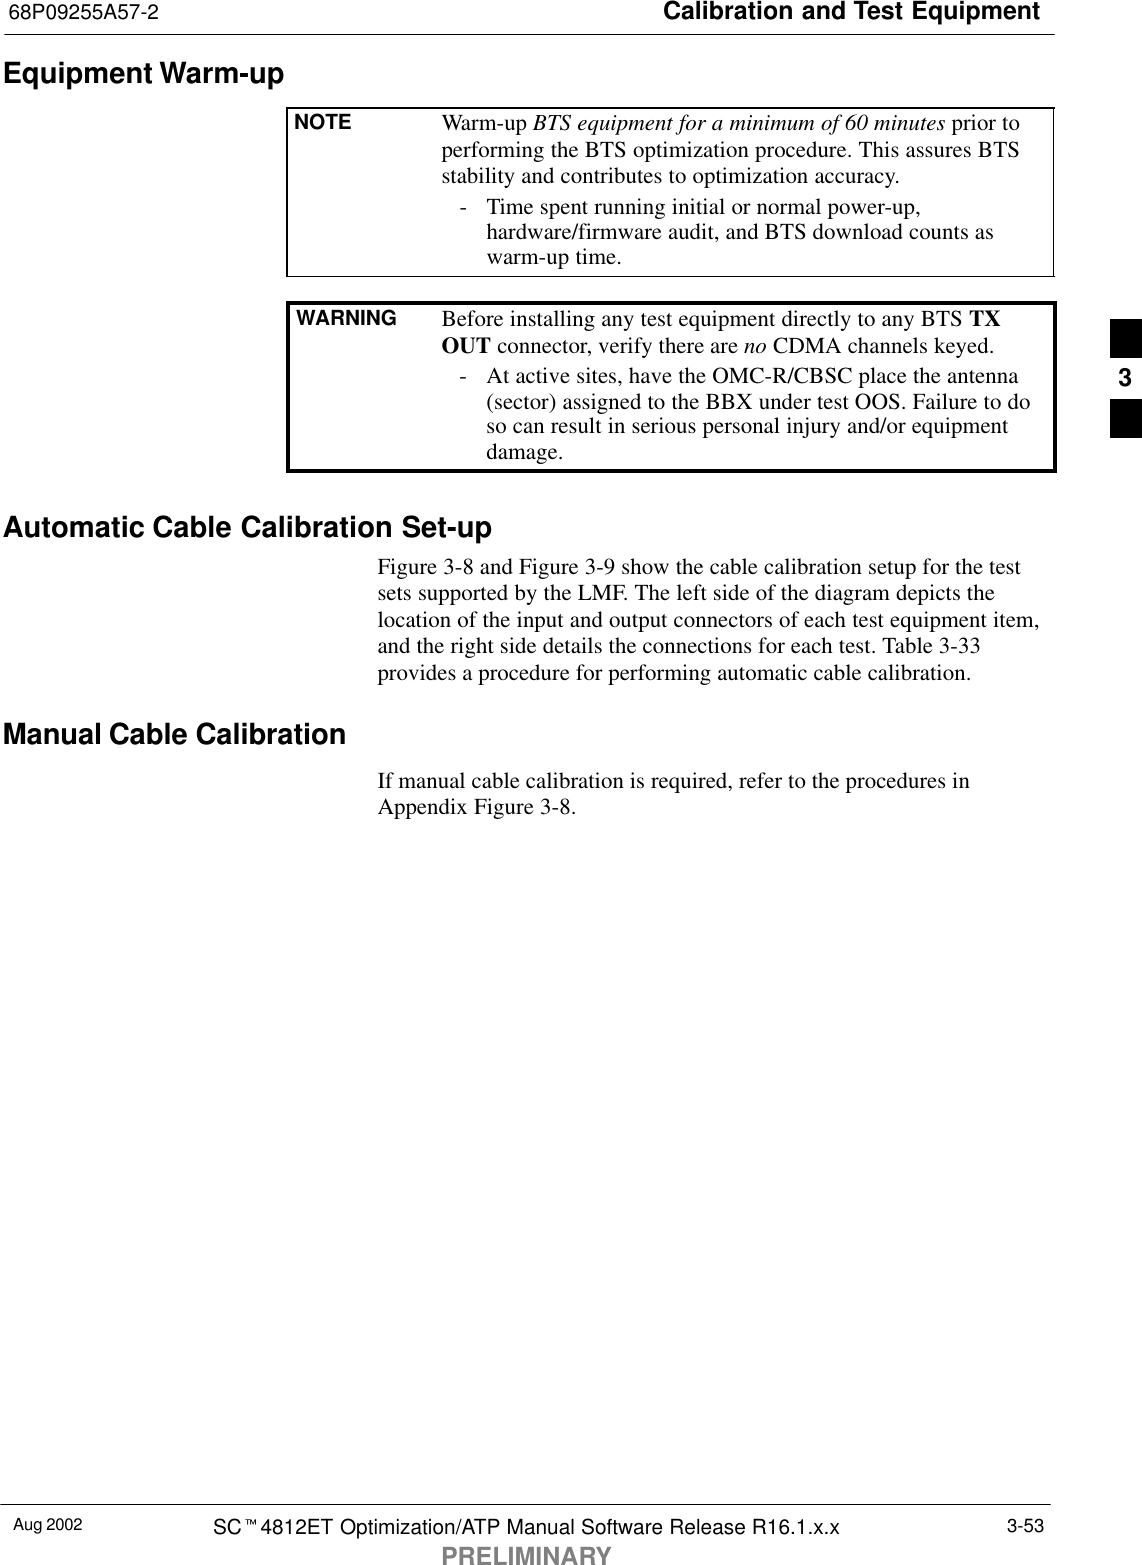 Calibration and Test Equipment68P09255A57-2Aug 2002 SCt4812ET Optimization/ATP Manual Software Release R16.1.x.xPRELIMINARY3-53Equipment Warm-upNOTE Warm-up BTS equipment for a minimum of 60 minutes prior toperforming the BTS optimization procedure. This assures BTSstability and contributes to optimization accuracy.- Time spent running initial or normal power-up,hardware/firmware audit, and BTS download counts aswarm-up time.WARNING Before installing any test equipment directly to any BTS TXOUT connector, verify there are no CDMA channels keyed.- At active sites, have the OMC-R/CBSC place the antenna(sector) assigned to the BBX under test OOS. Failure to doso can result in serious personal injury and/or equipmentdamage.Automatic Cable Calibration Set-upFigure 3-8 and Figure 3-9 show the cable calibration setup for the testsets supported by the LMF. The left side of the diagram depicts thelocation of the input and output connectors of each test equipment item,and the right side details the connections for each test. Table 3-33provides a procedure for performing automatic cable calibration.Manual Cable CalibrationIf manual cable calibration is required, refer to the procedures inAppendix Figure 3-8.3